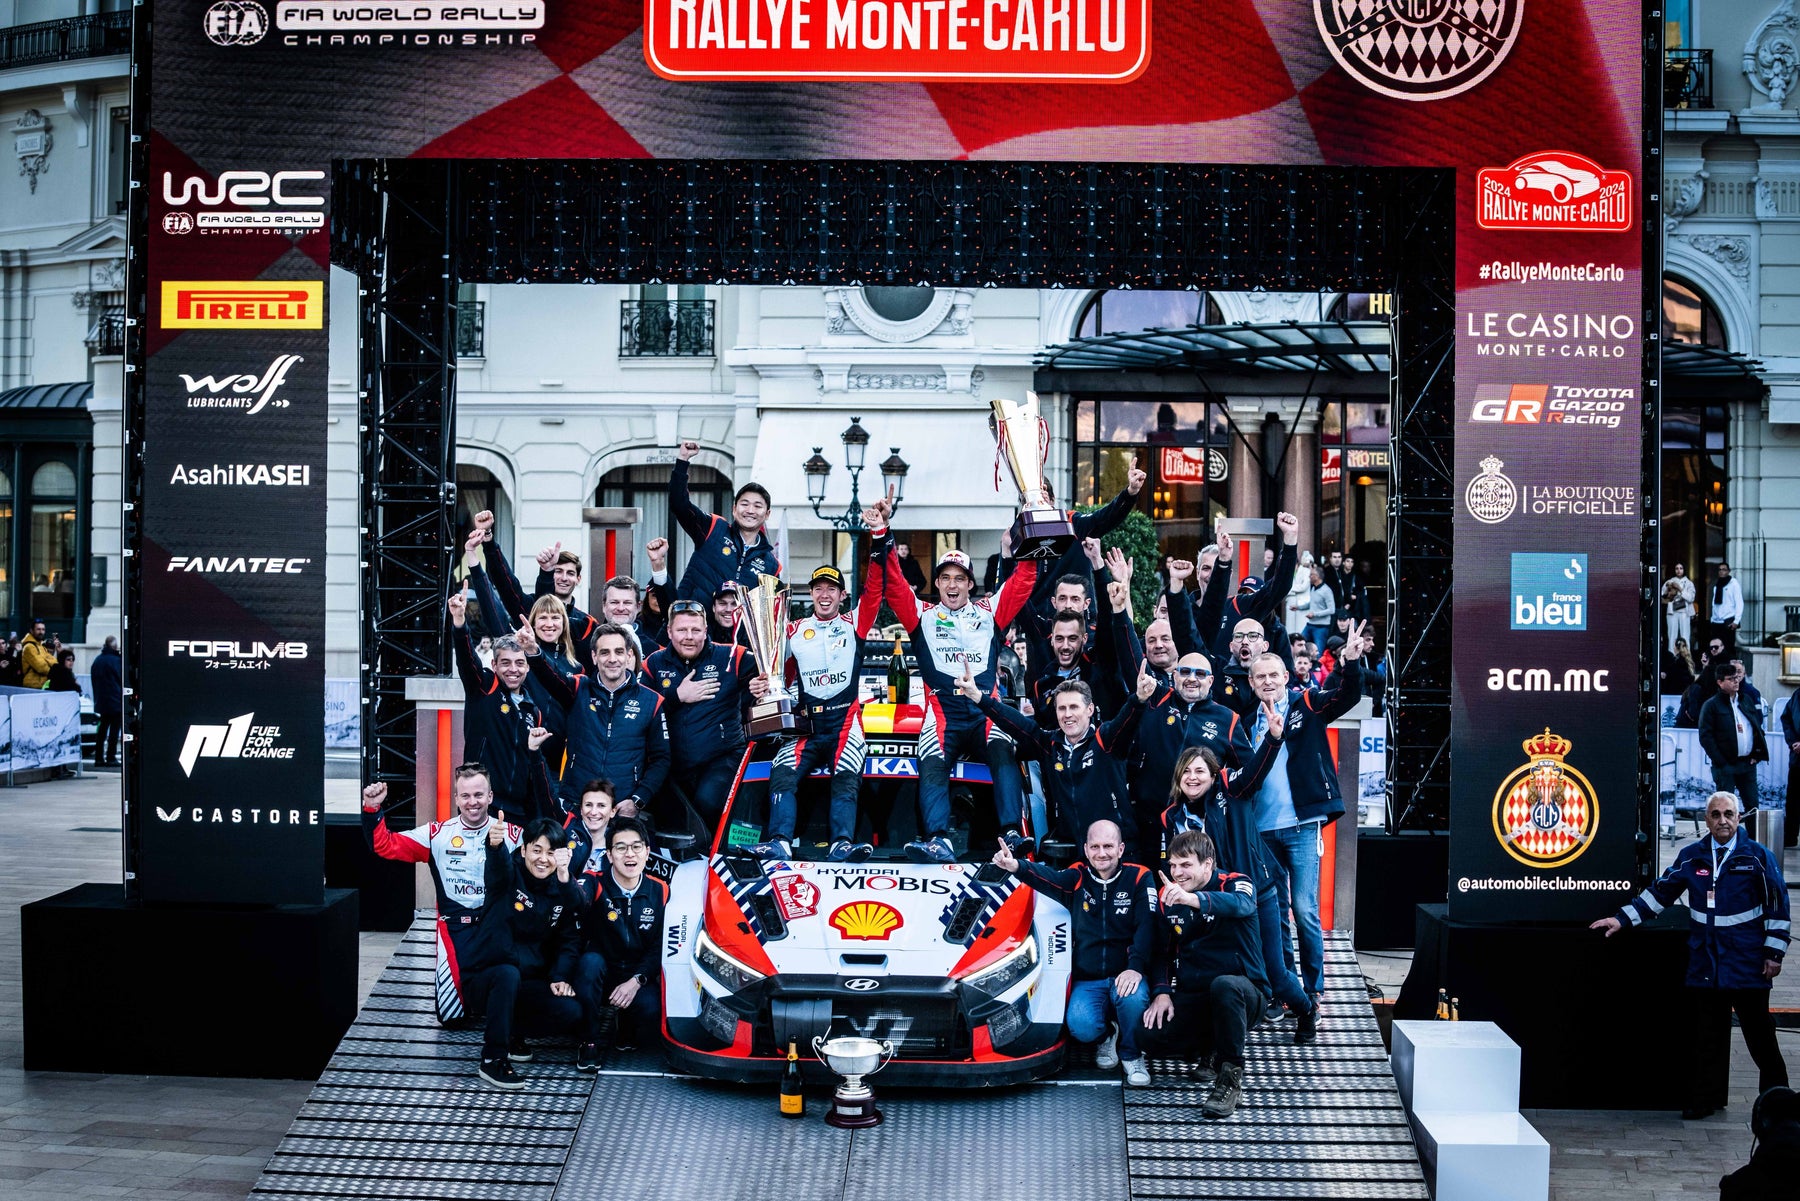 THIERRY NEUVILLE AND MARTIJN WYDAEGHE START WORLD RALLY CHAMPIONSHIP BY WINNING 2024 MONTE CARLO RALLY